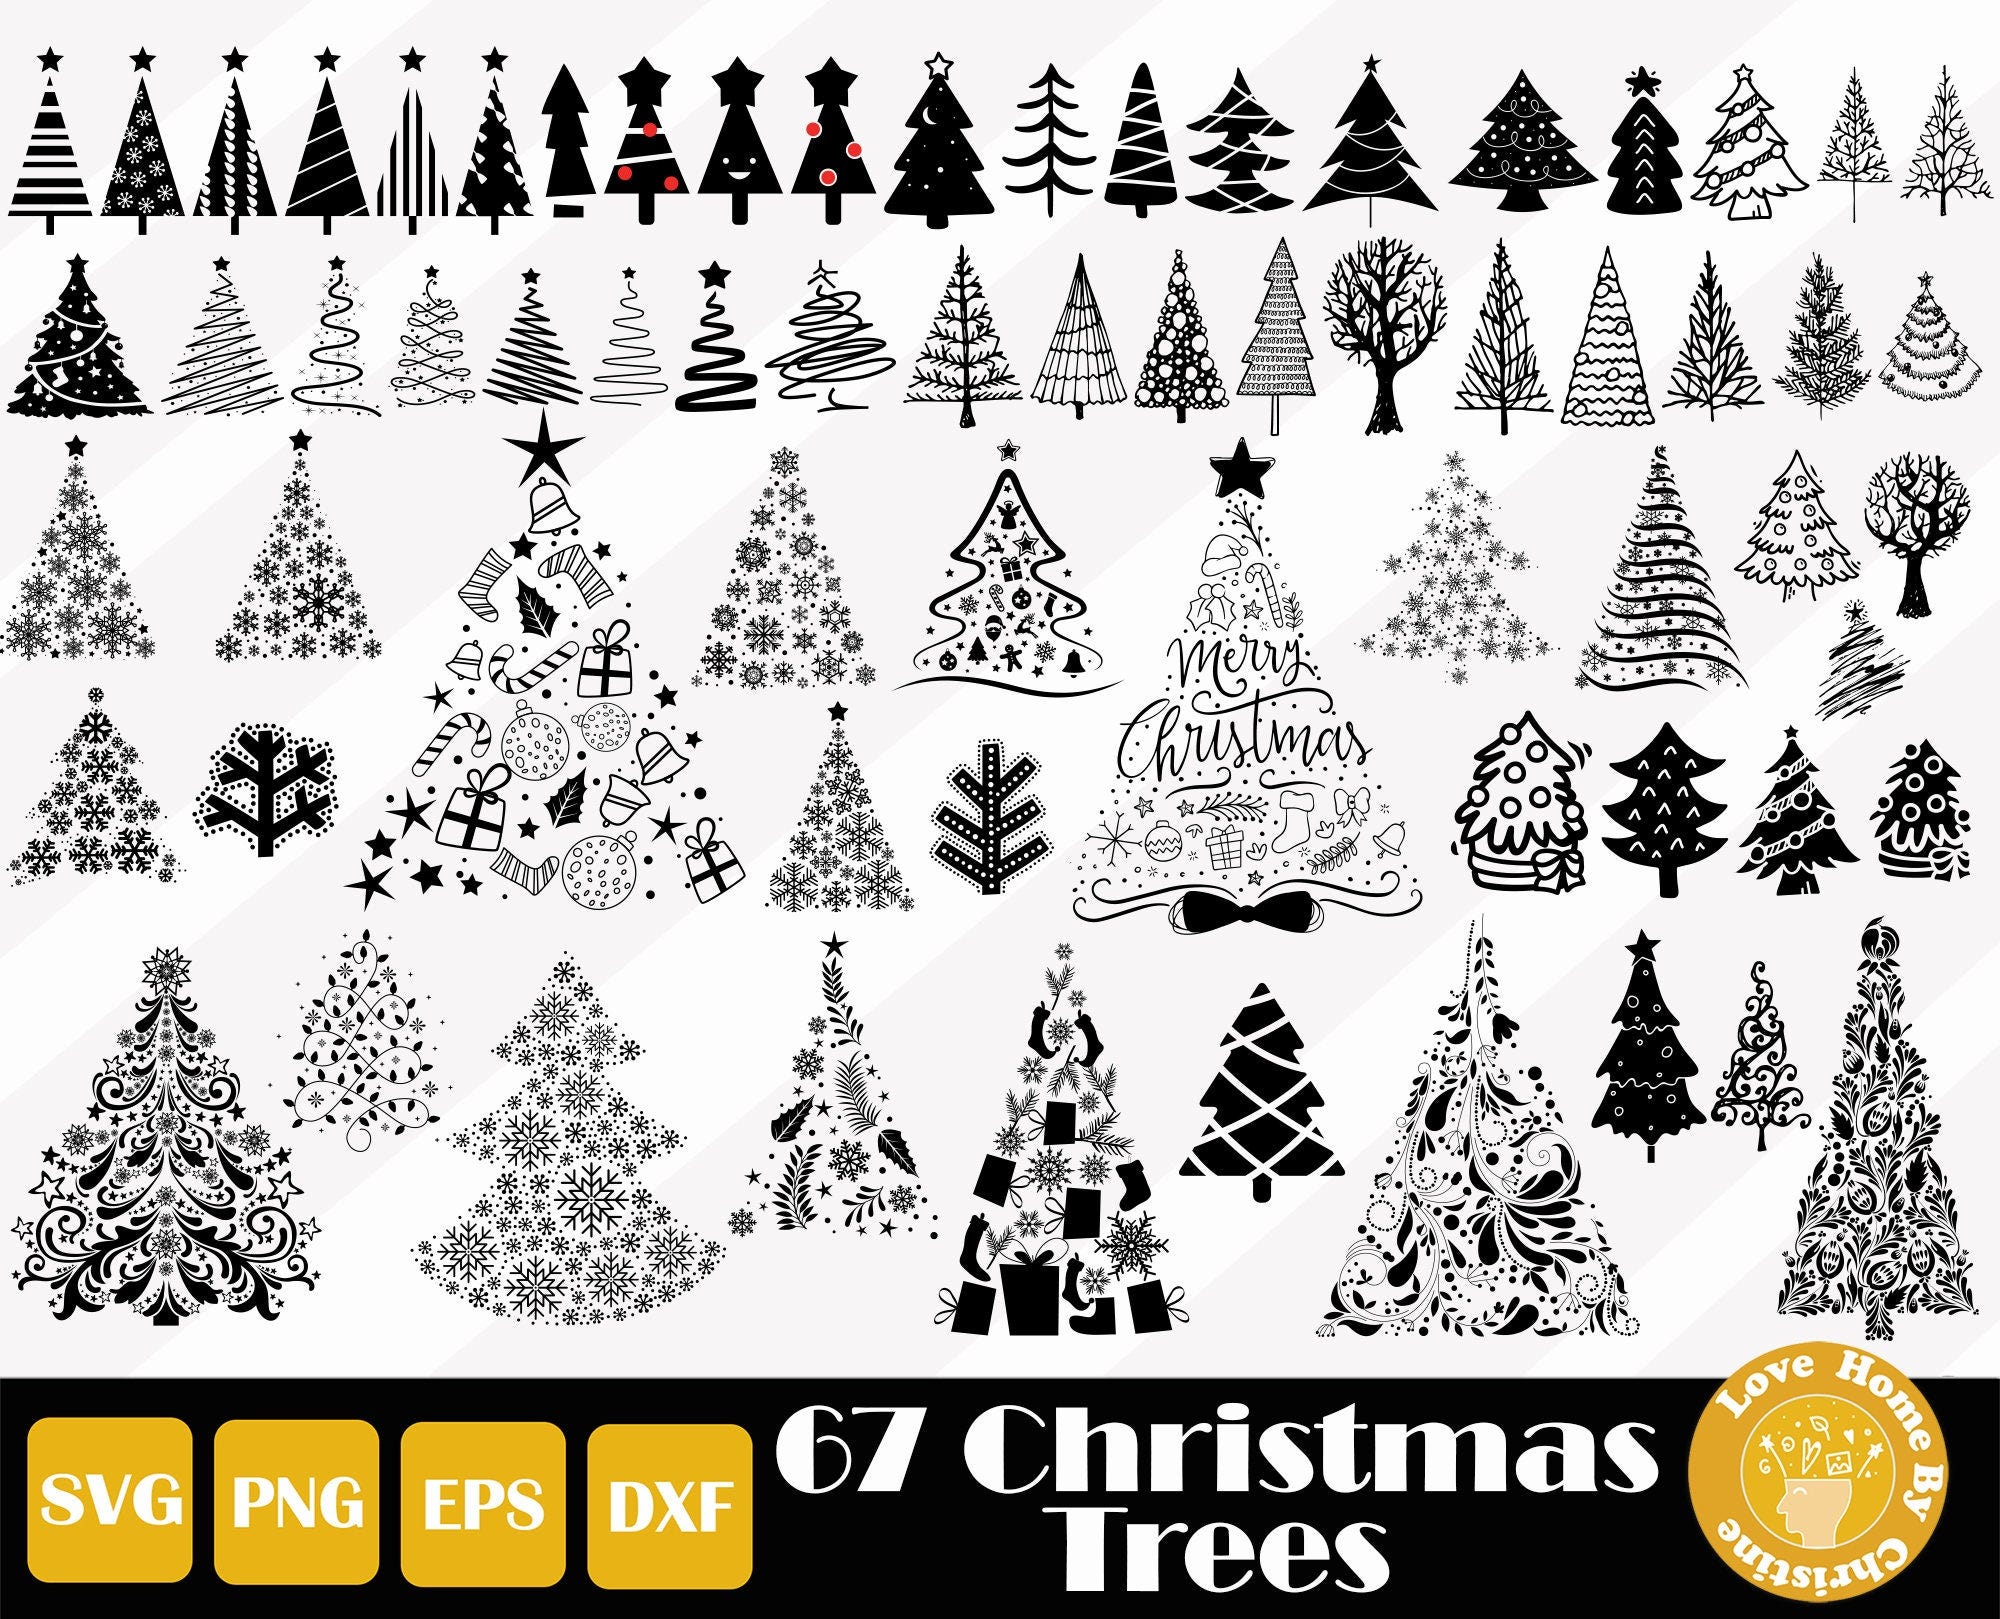 67 Christmas Tree Svg, Christmas Bundle, Christmas PNG SVG EPS Cut Files for Cricut Silhouette Files, Easy Cut, Instant Download